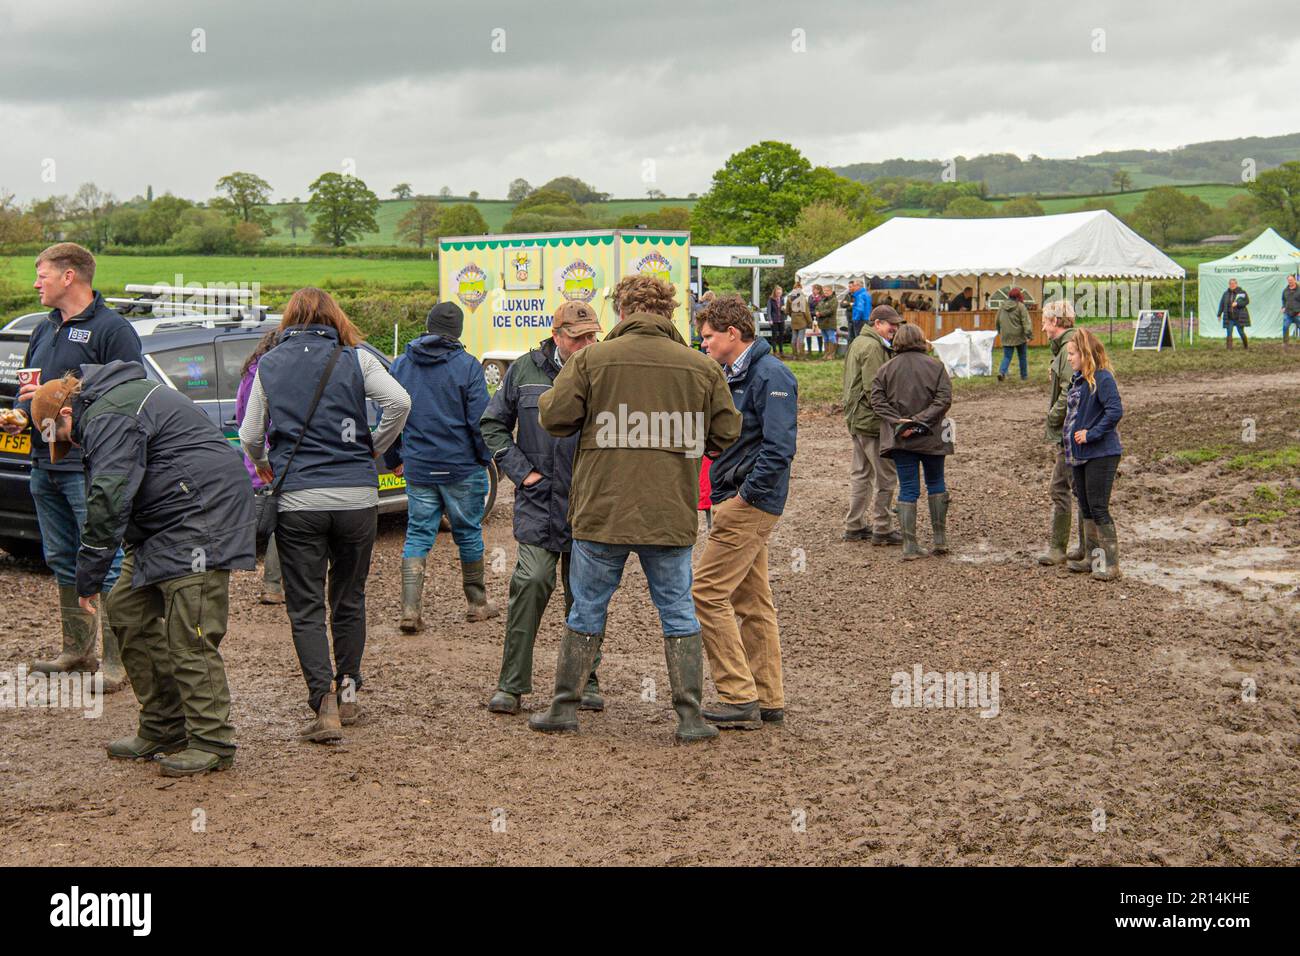 mud and muddy conditions at country show in UK Stock Photo